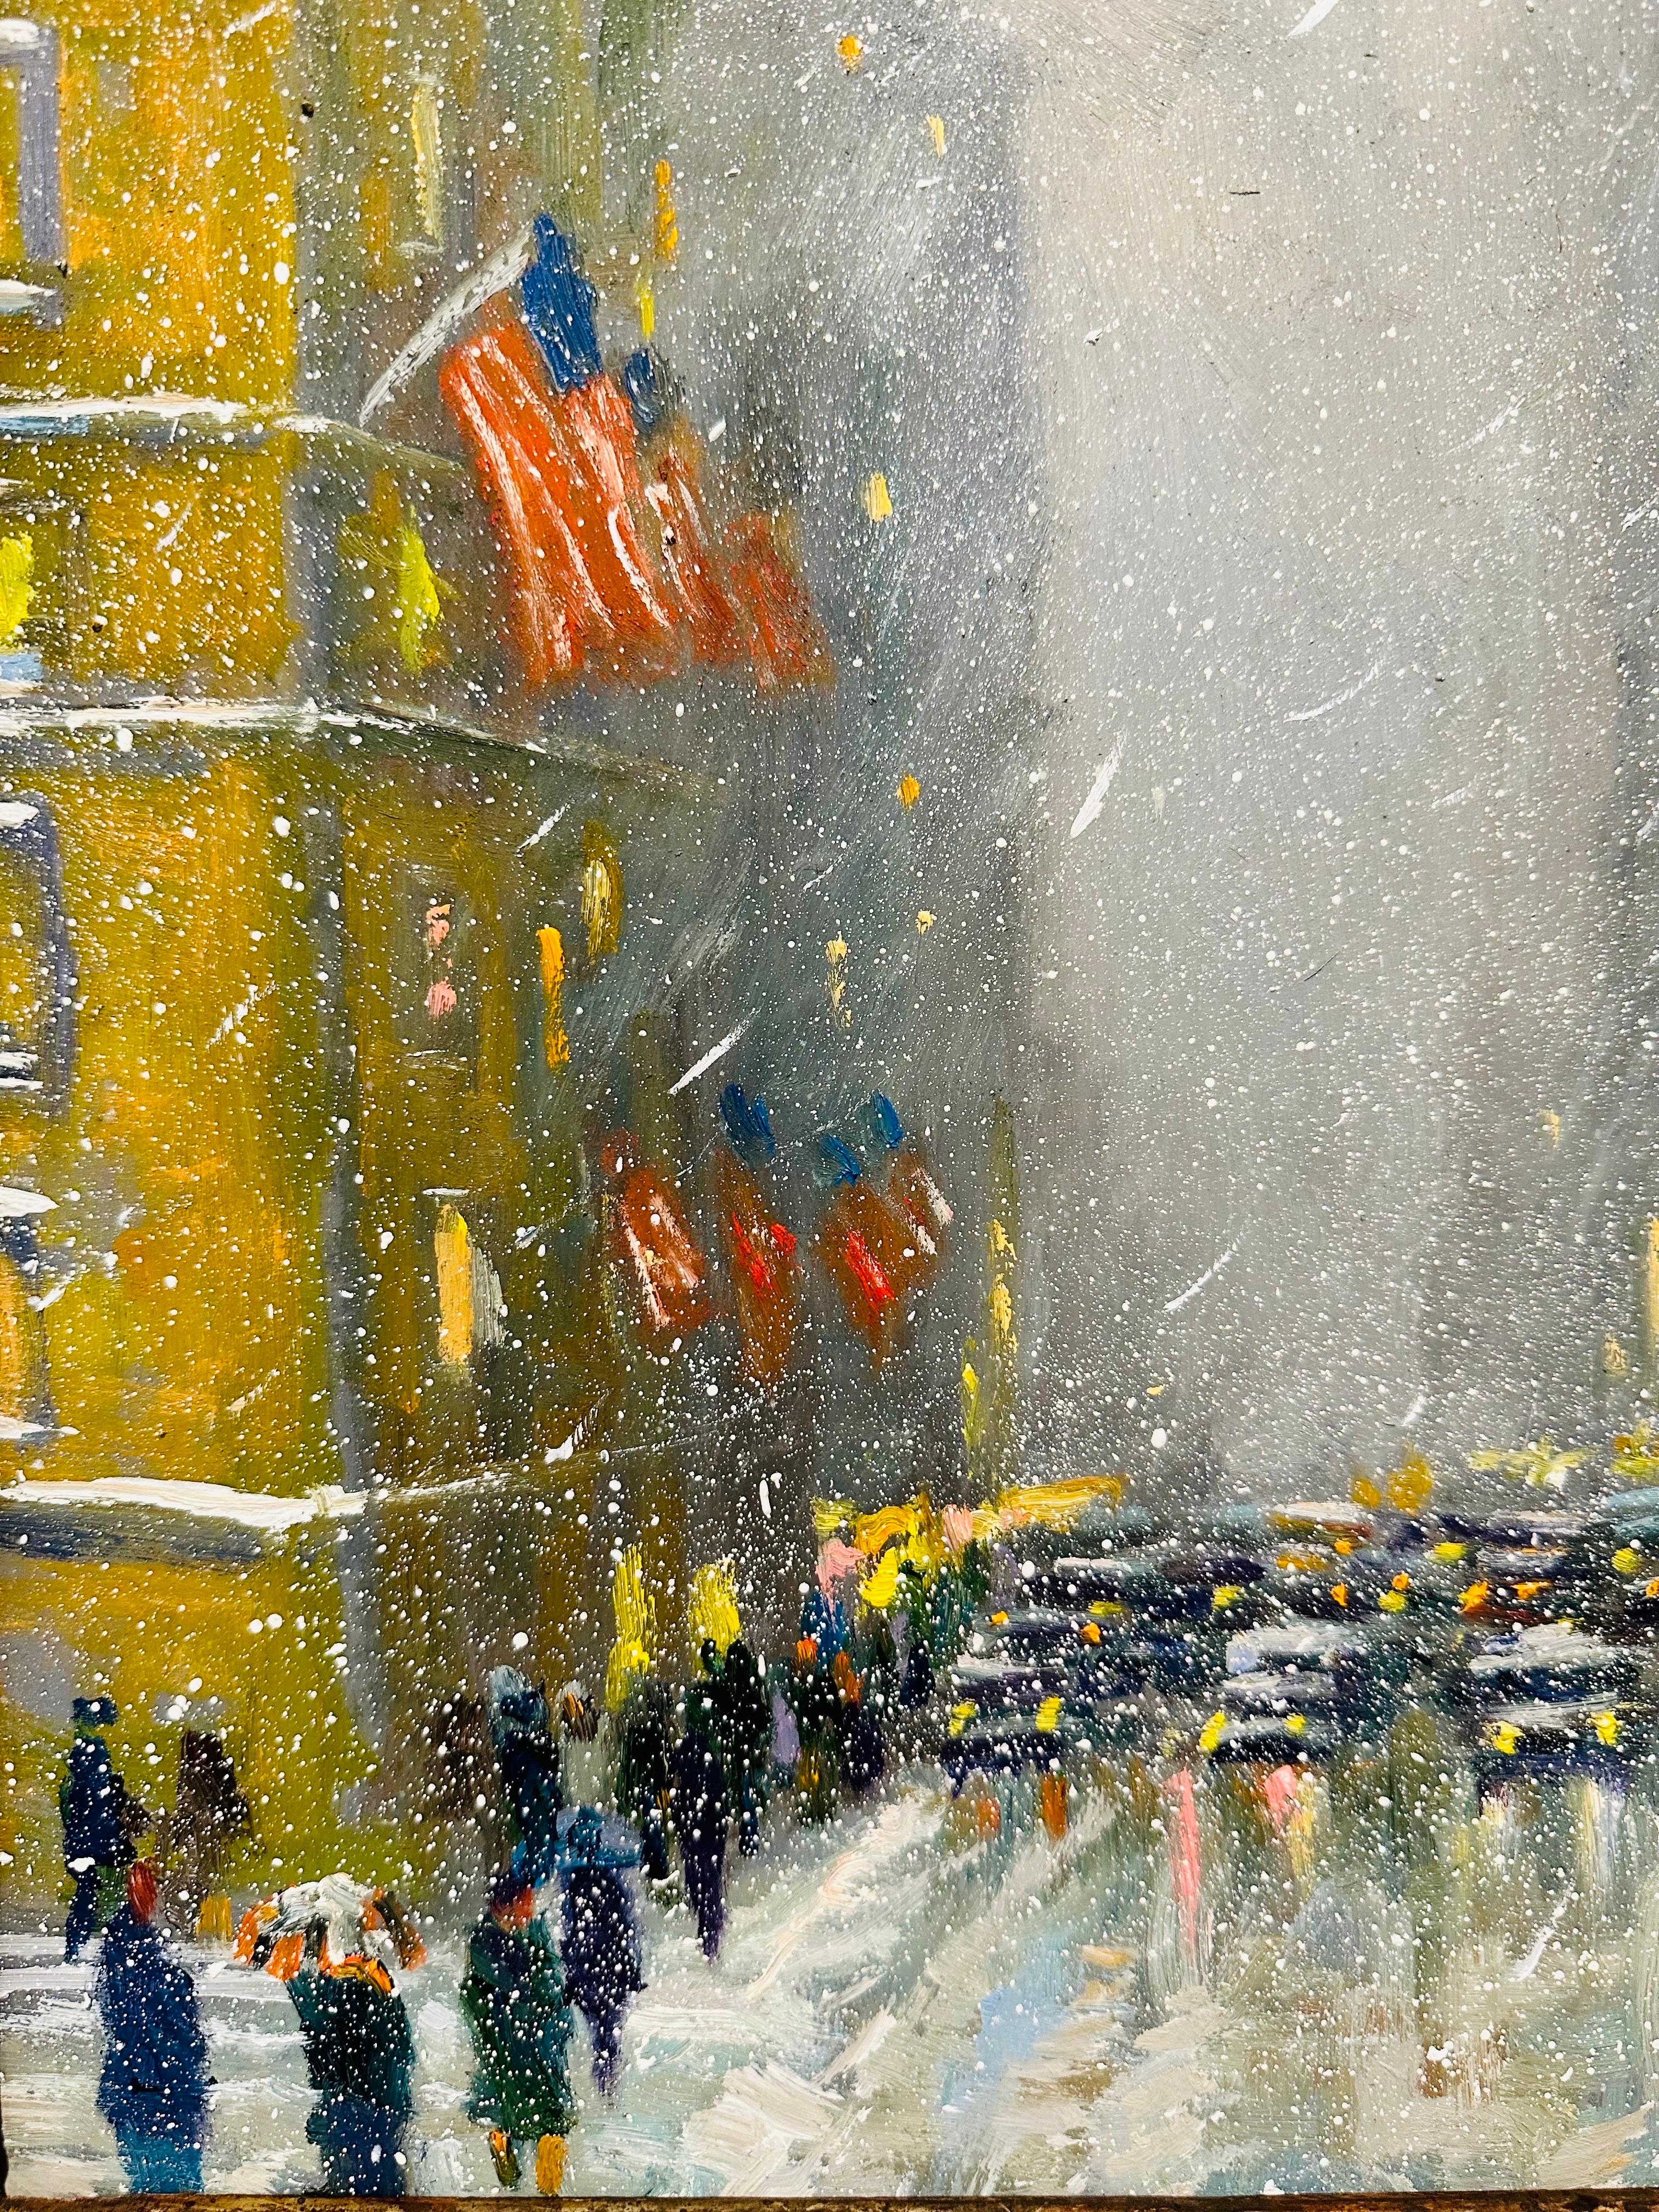 American Classical Traffic Jam in New York City Impressionist Winter Car Scene Oil Painting For Sale